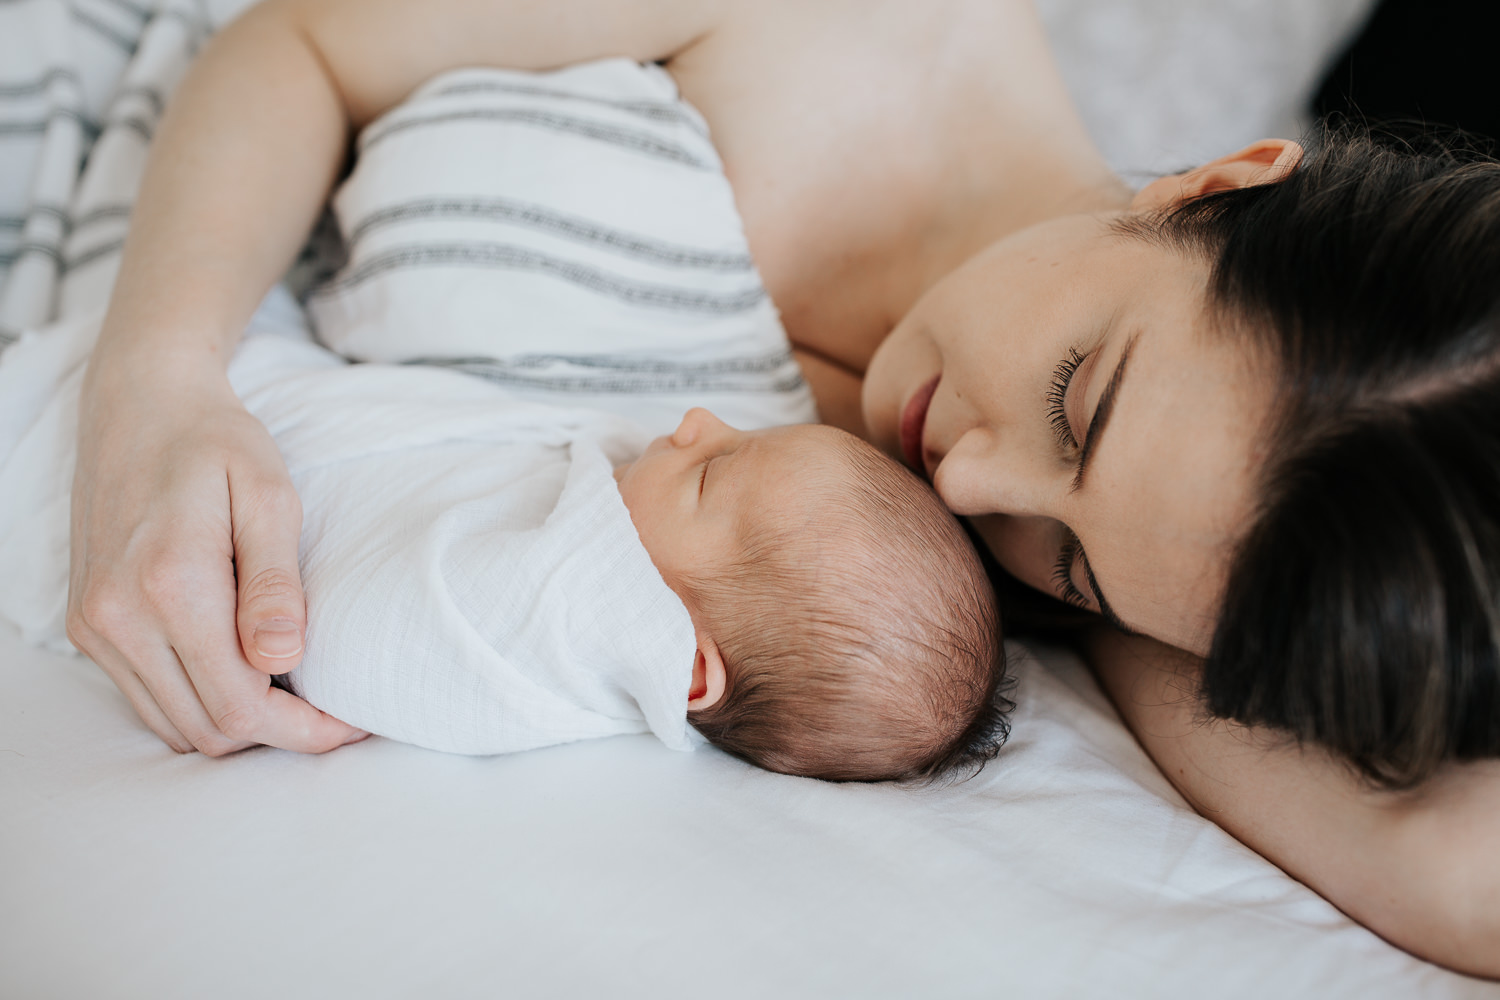 new mother with long dark hair lying on bed next to sleeping 2 week old baby boy wrapped in white swaddle - Barrie Lifestyle Photos